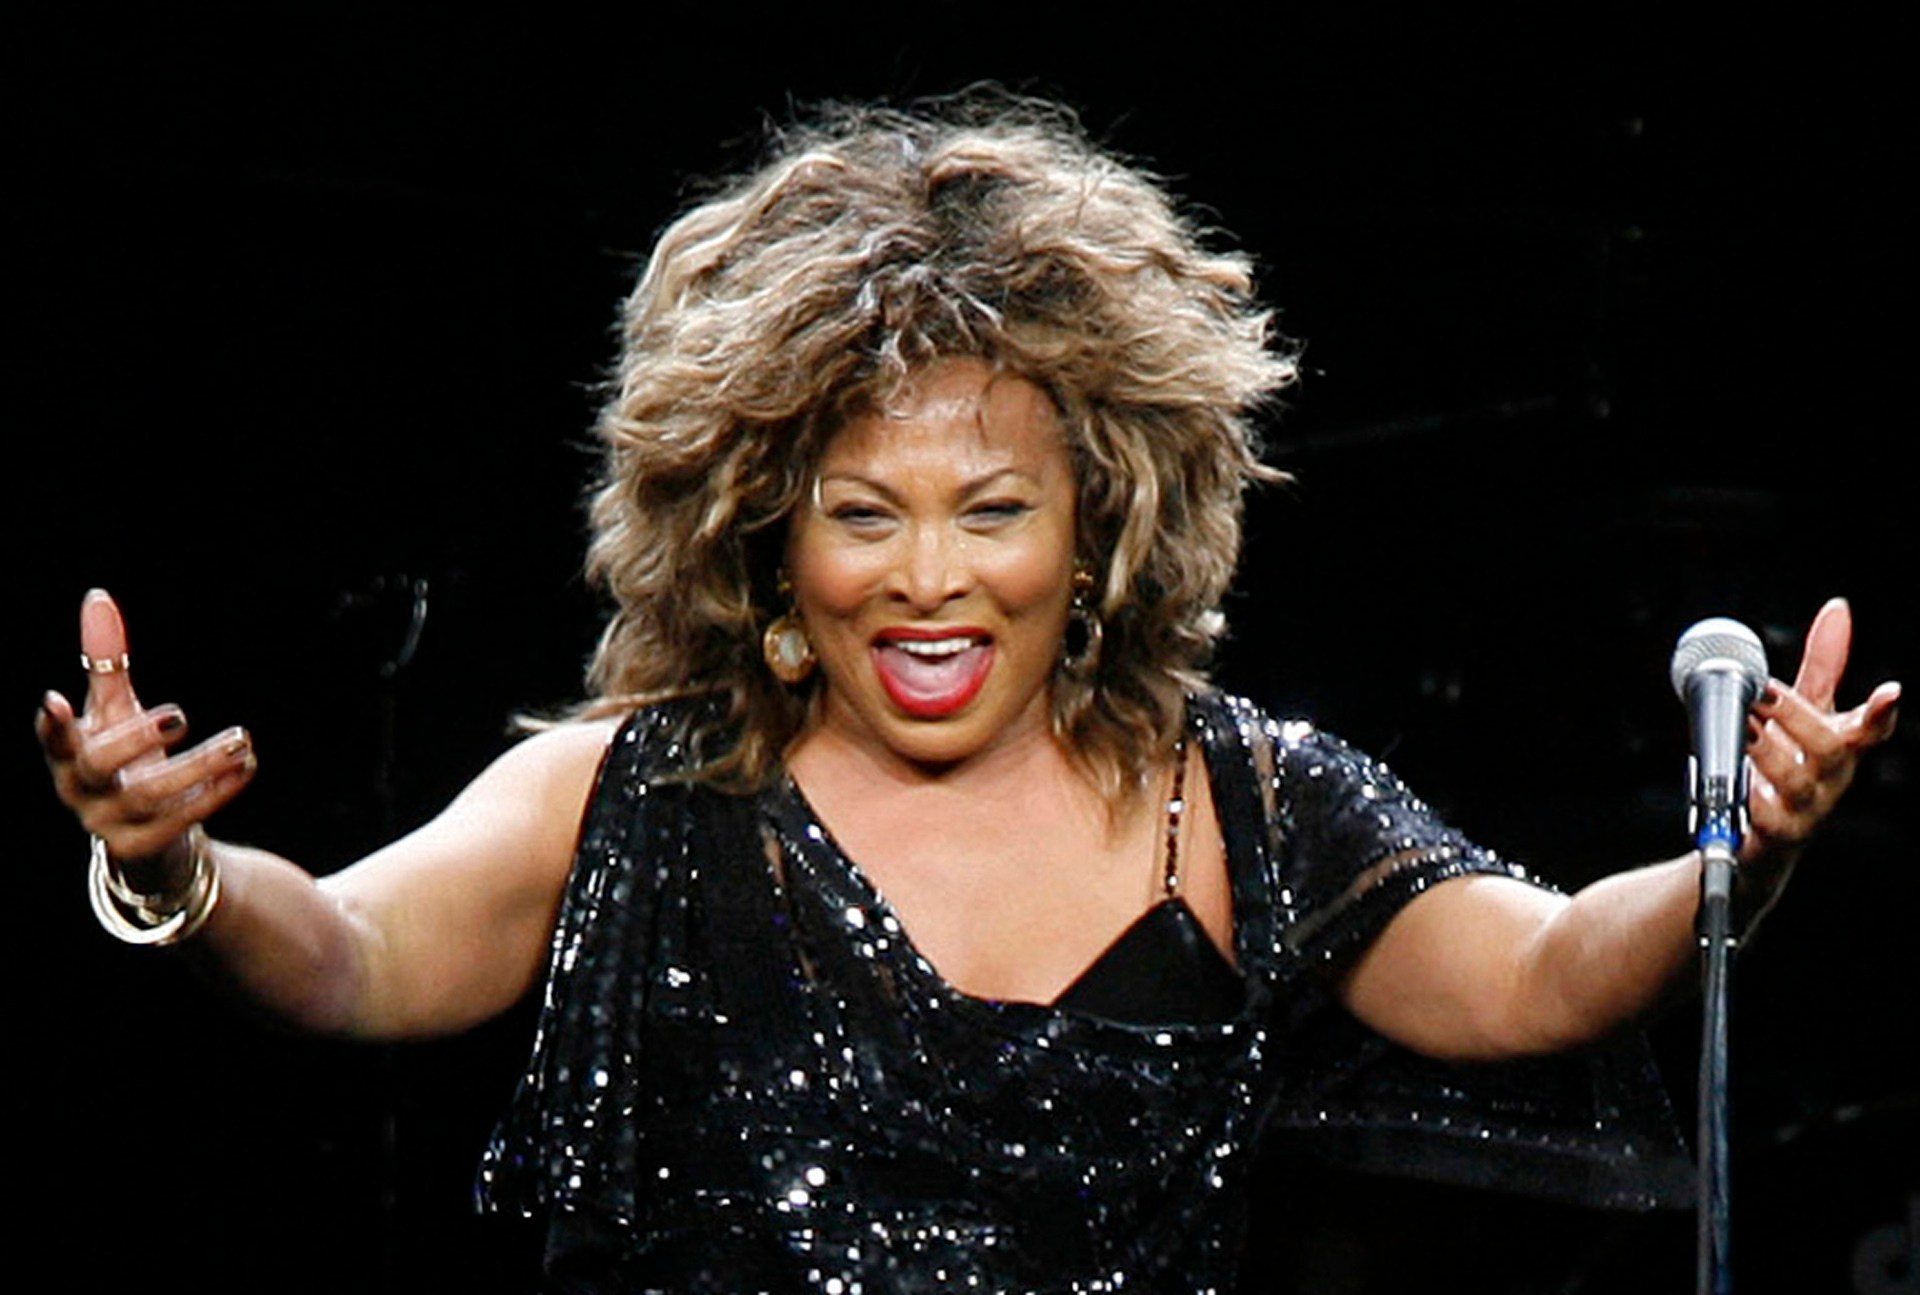 Photos: Tina Turner, a life in music | Art and Culture News